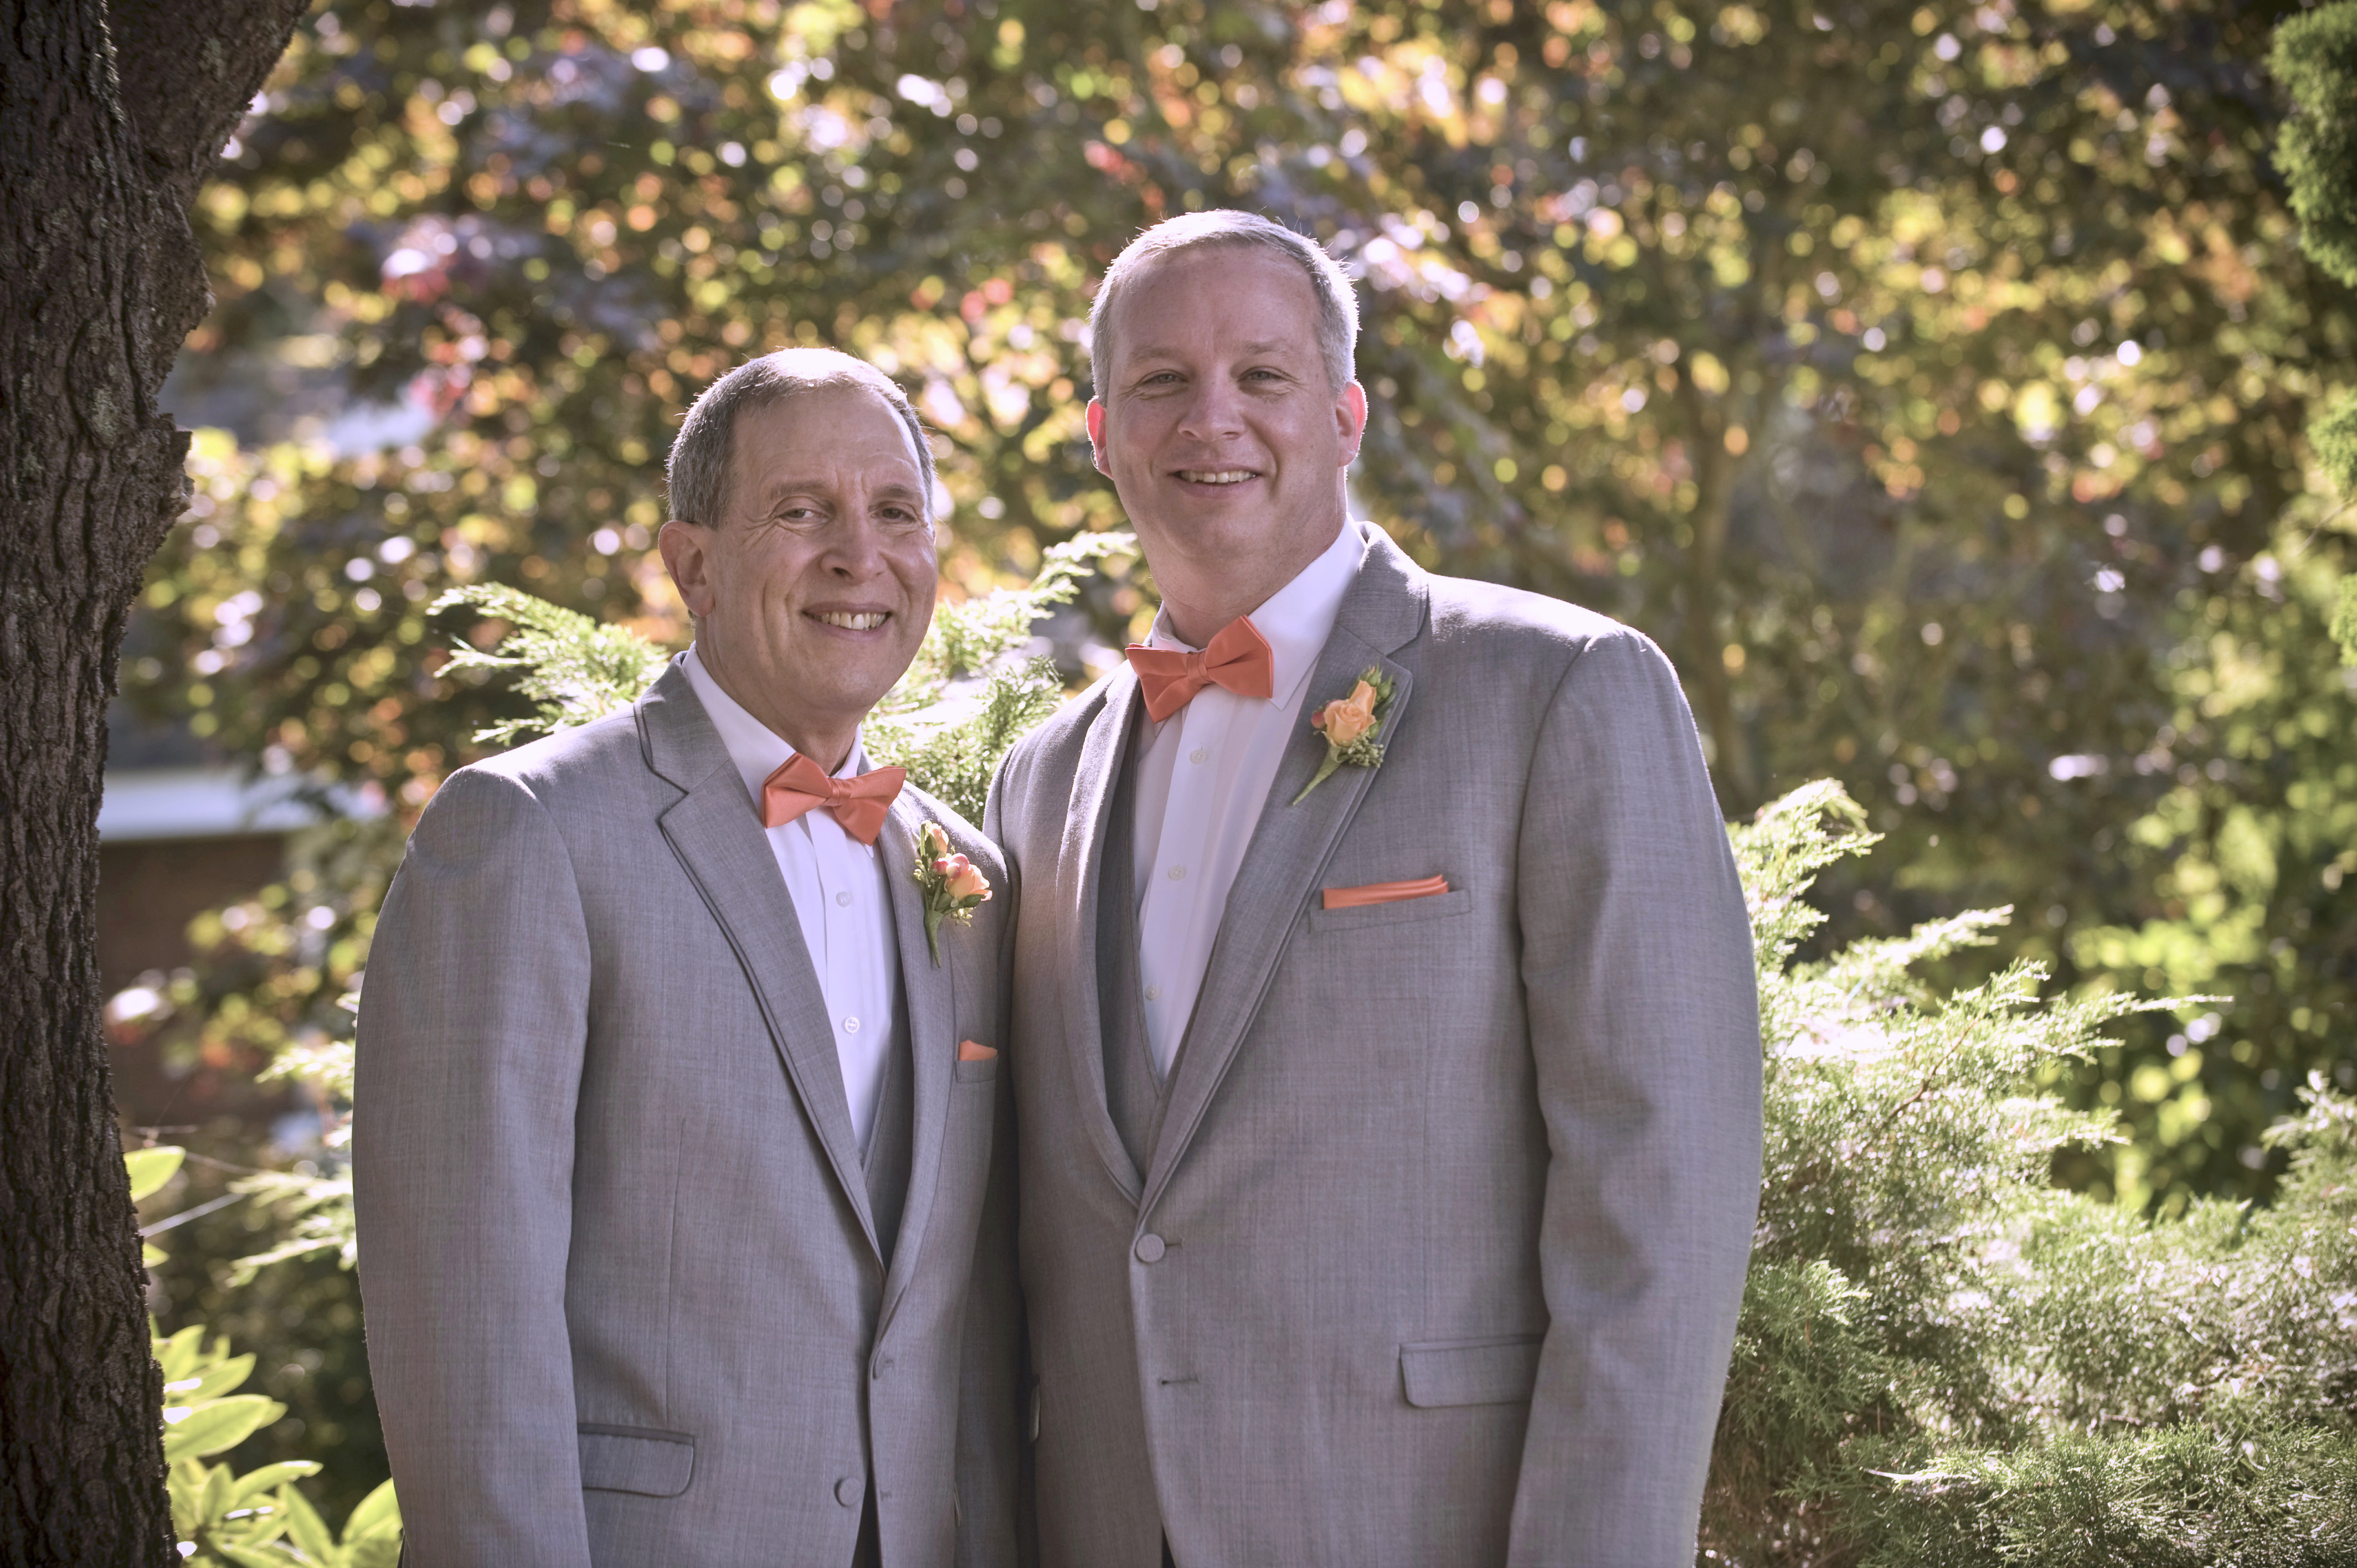 Alan Steinman and Dallas Powers were married on September 20, 2013 on Fox Island, WA. Alan shares, “We had been partners since 1996, and now we were husbands. Another of my most joyous events.”